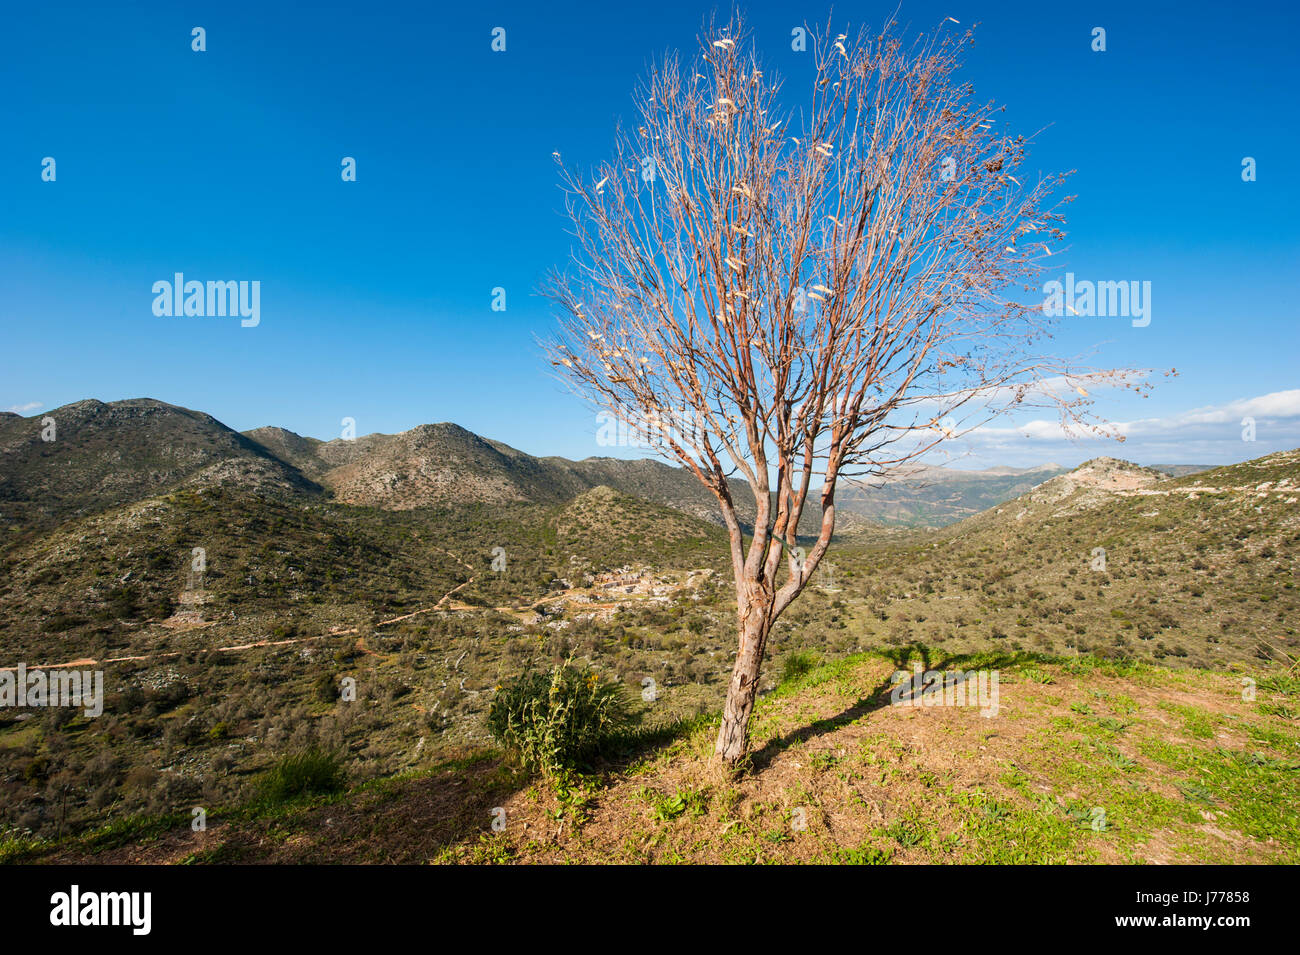 A view of mountainous landscape in norther part of Crete, Greece. Stock Photo